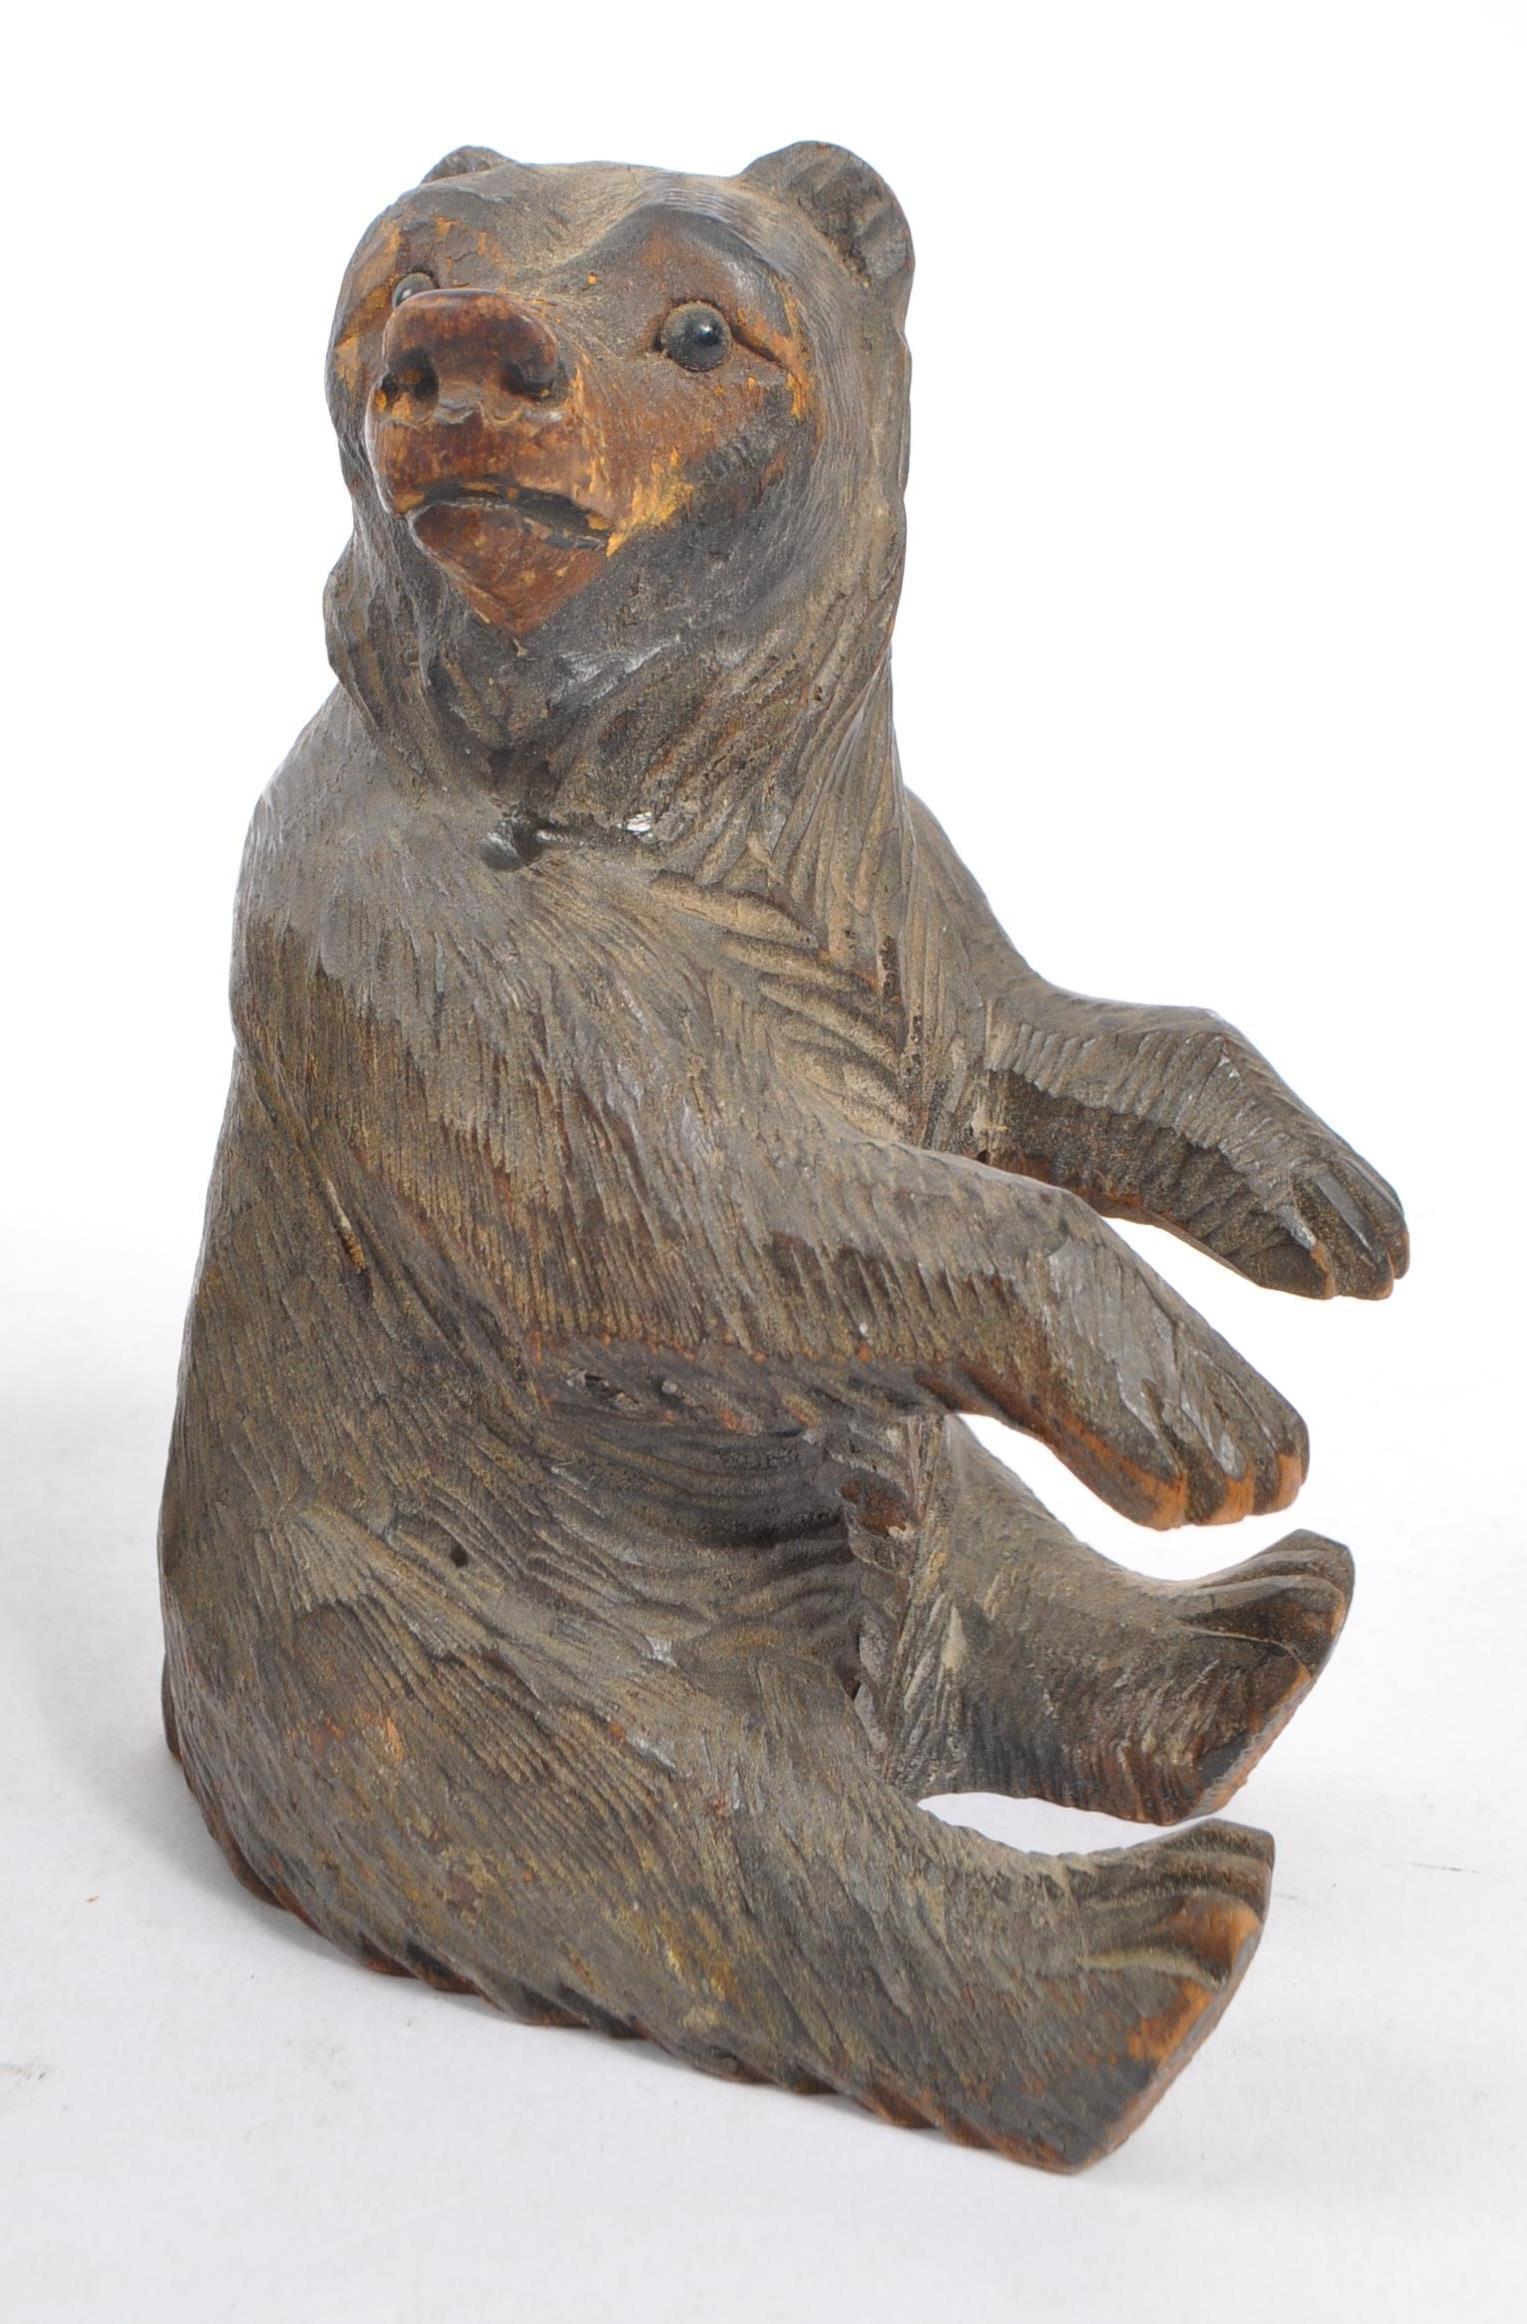 TWO BLACK FOREST HAND CARVED WOODEN BEARS WITH HEDGEHOG - Image 4 of 6